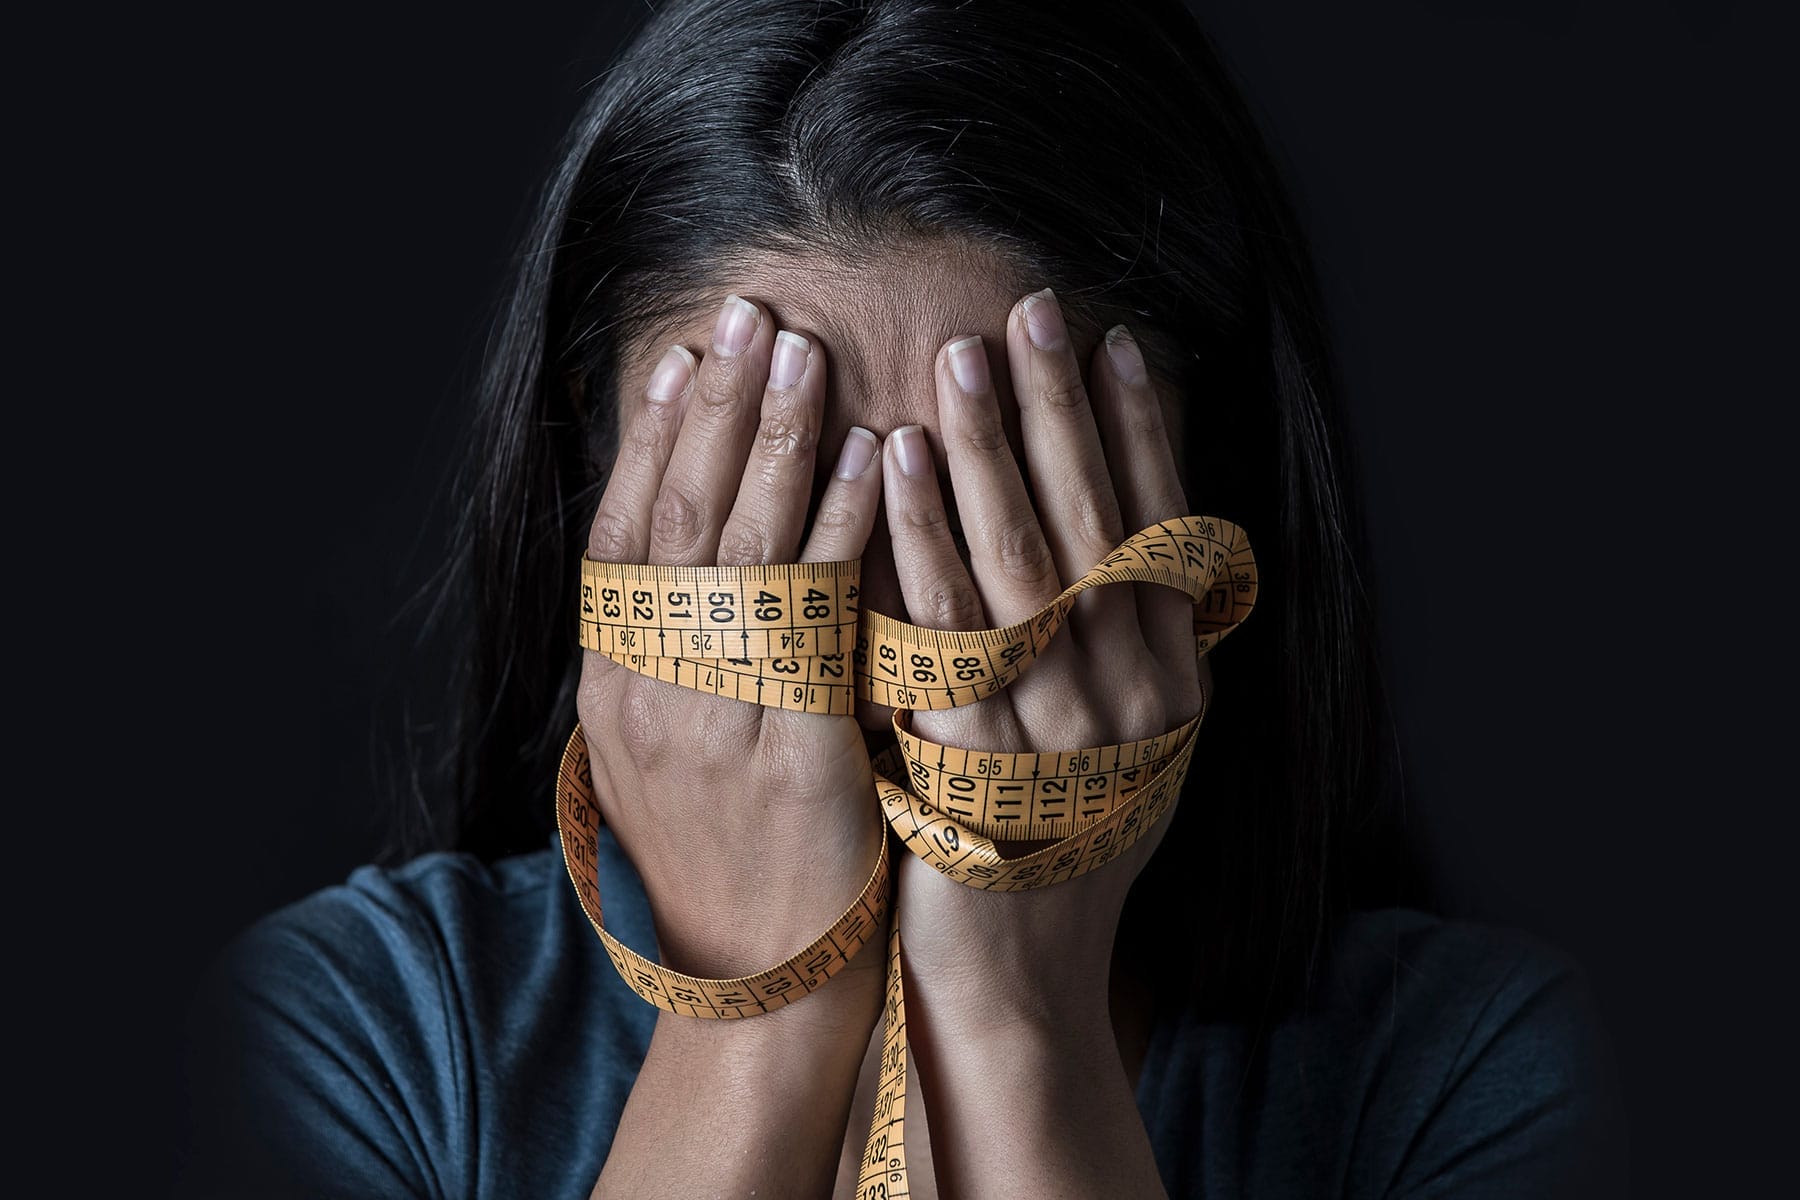 Woman hides face in hands and measuring tape as she wonders, "What is Bulimia?"